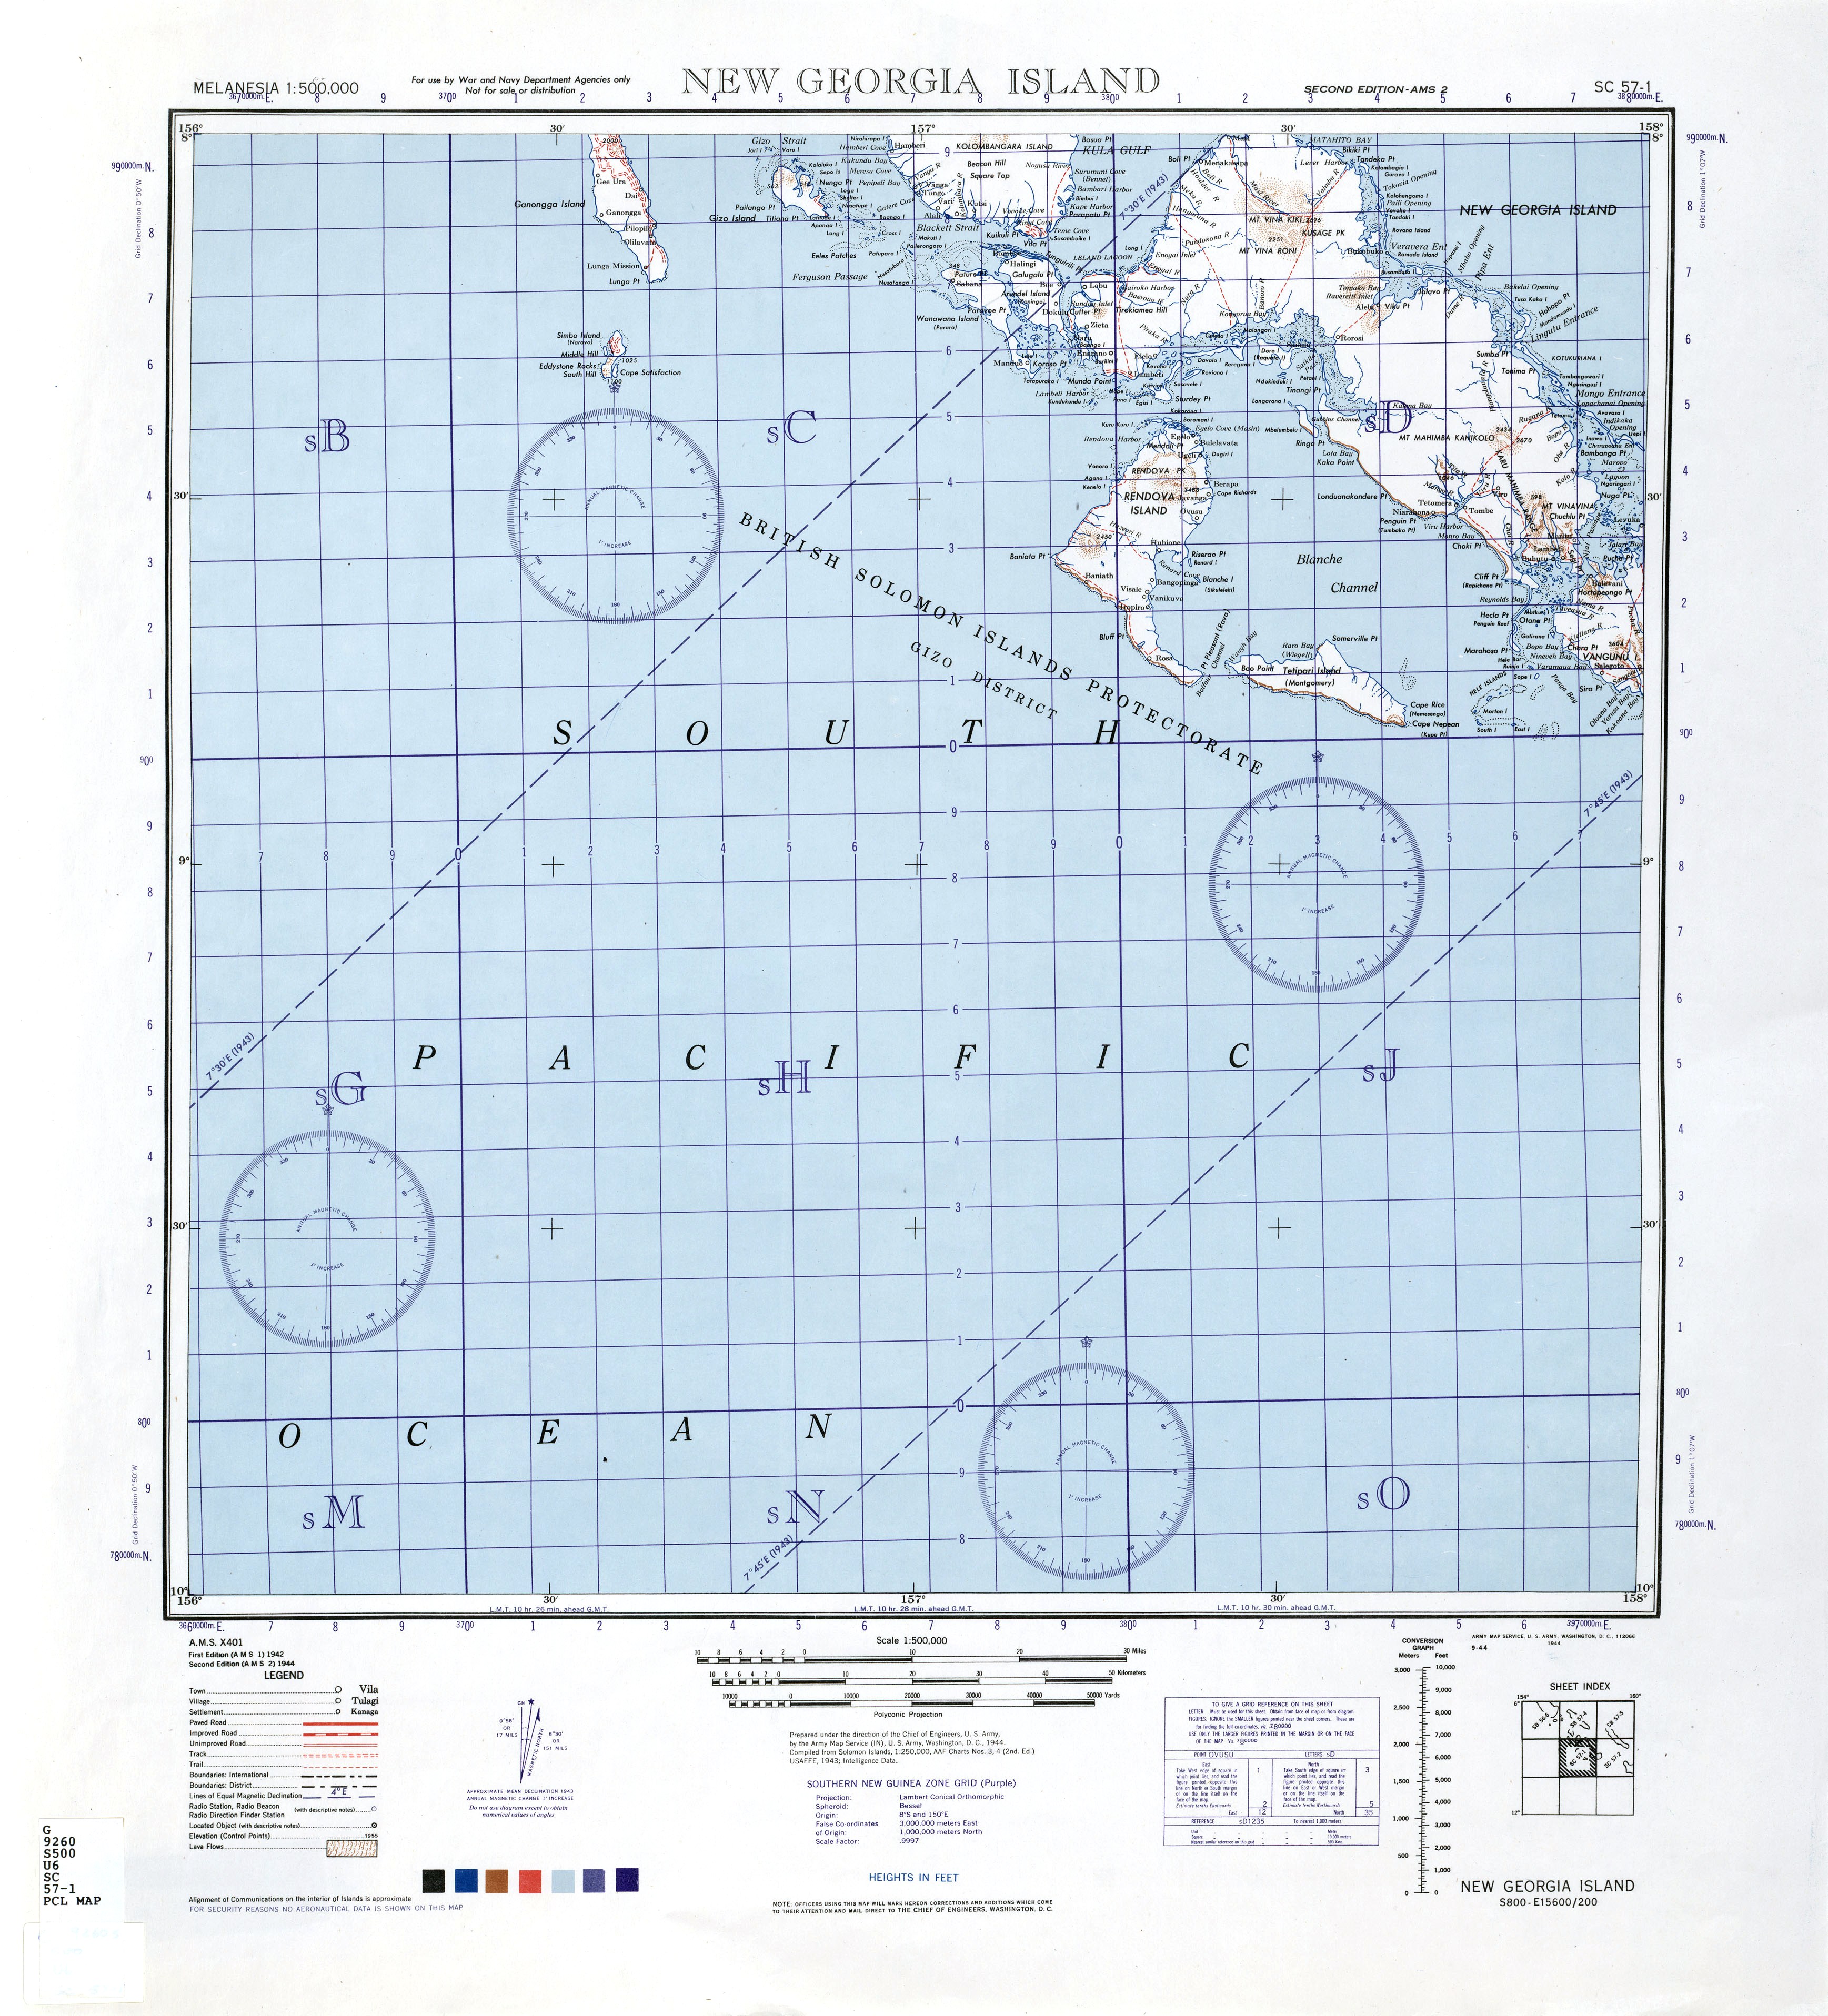 1944 United States Army map of New Georgia and Rendova Islands with a portion of the Solomon Sea in the Solomon Islands.